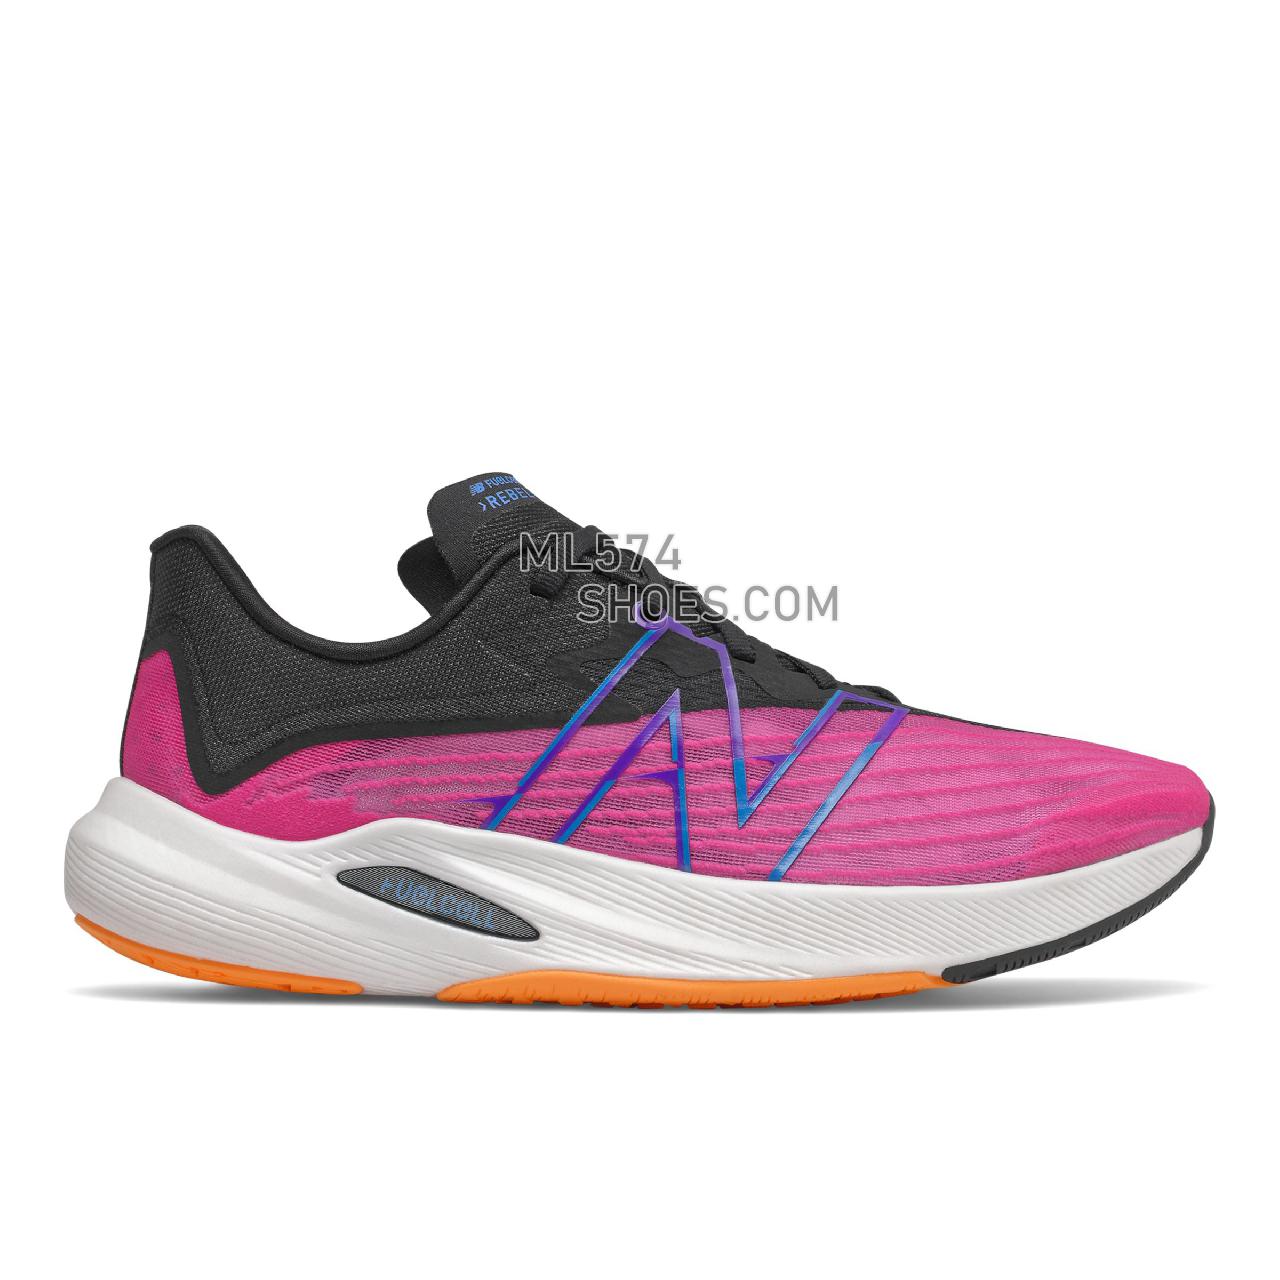 New Balance FuelCell Rebel v2 - Men's Neutral Running - Pink Glo with Black - MFCXCP2